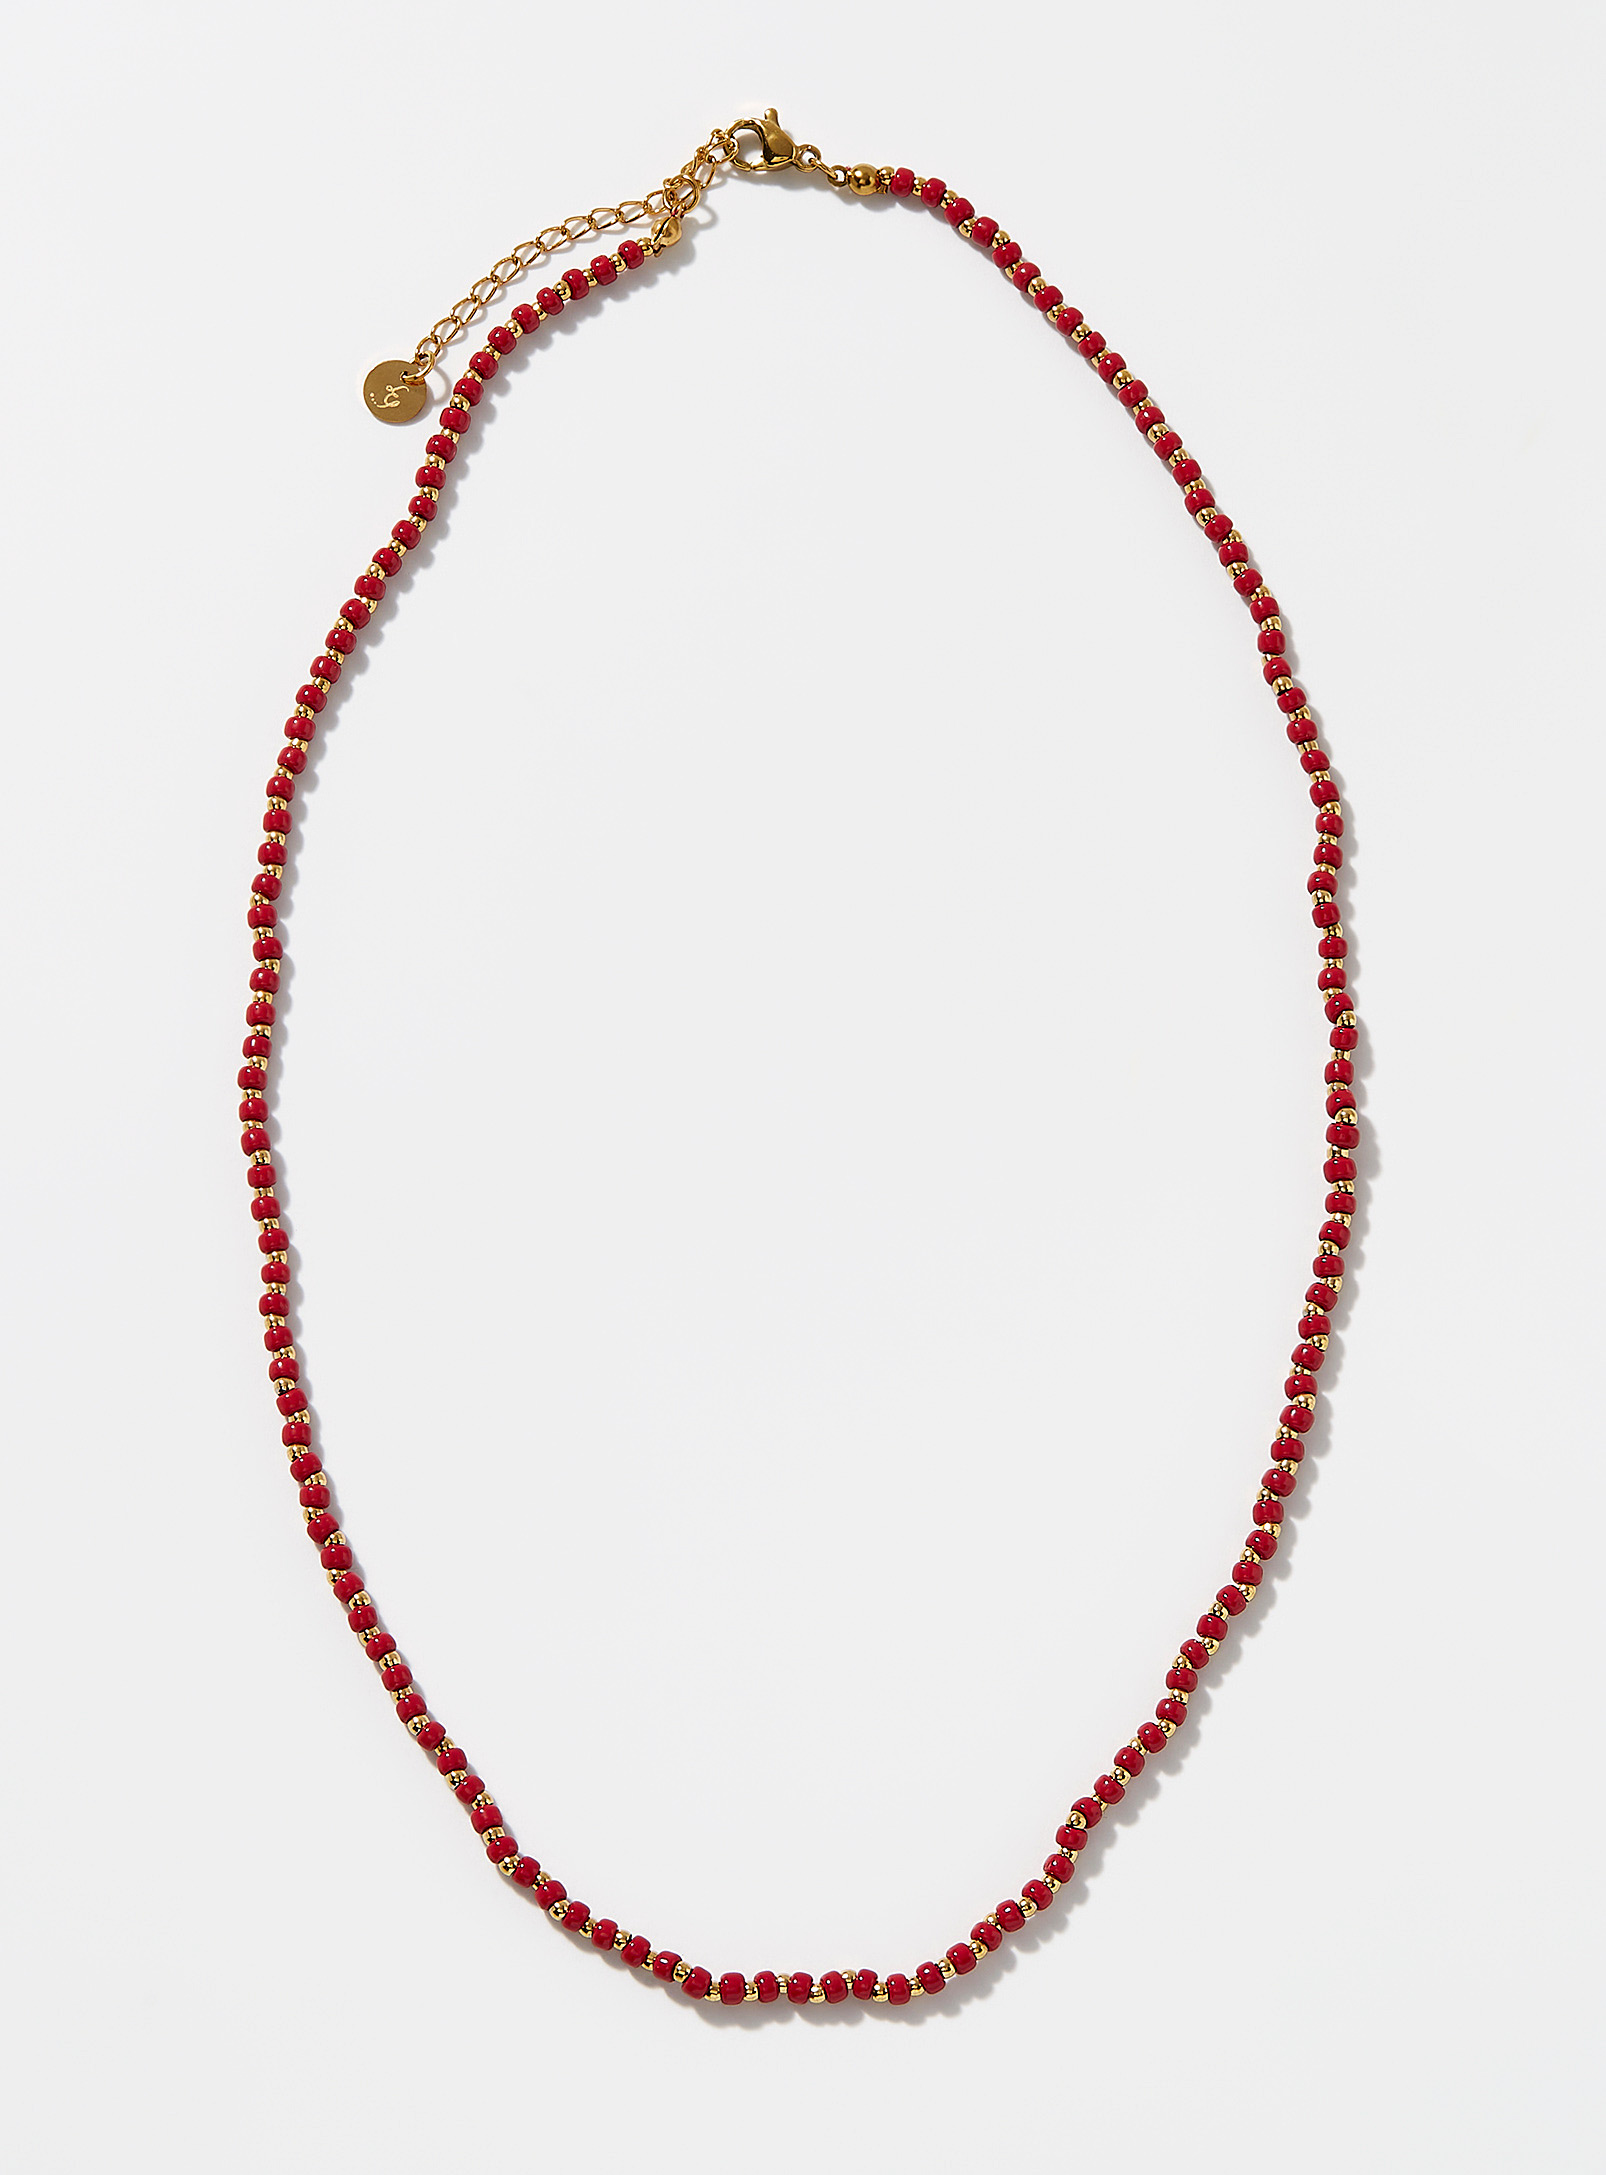 Le 31 - Men's Red and gold bead necklace